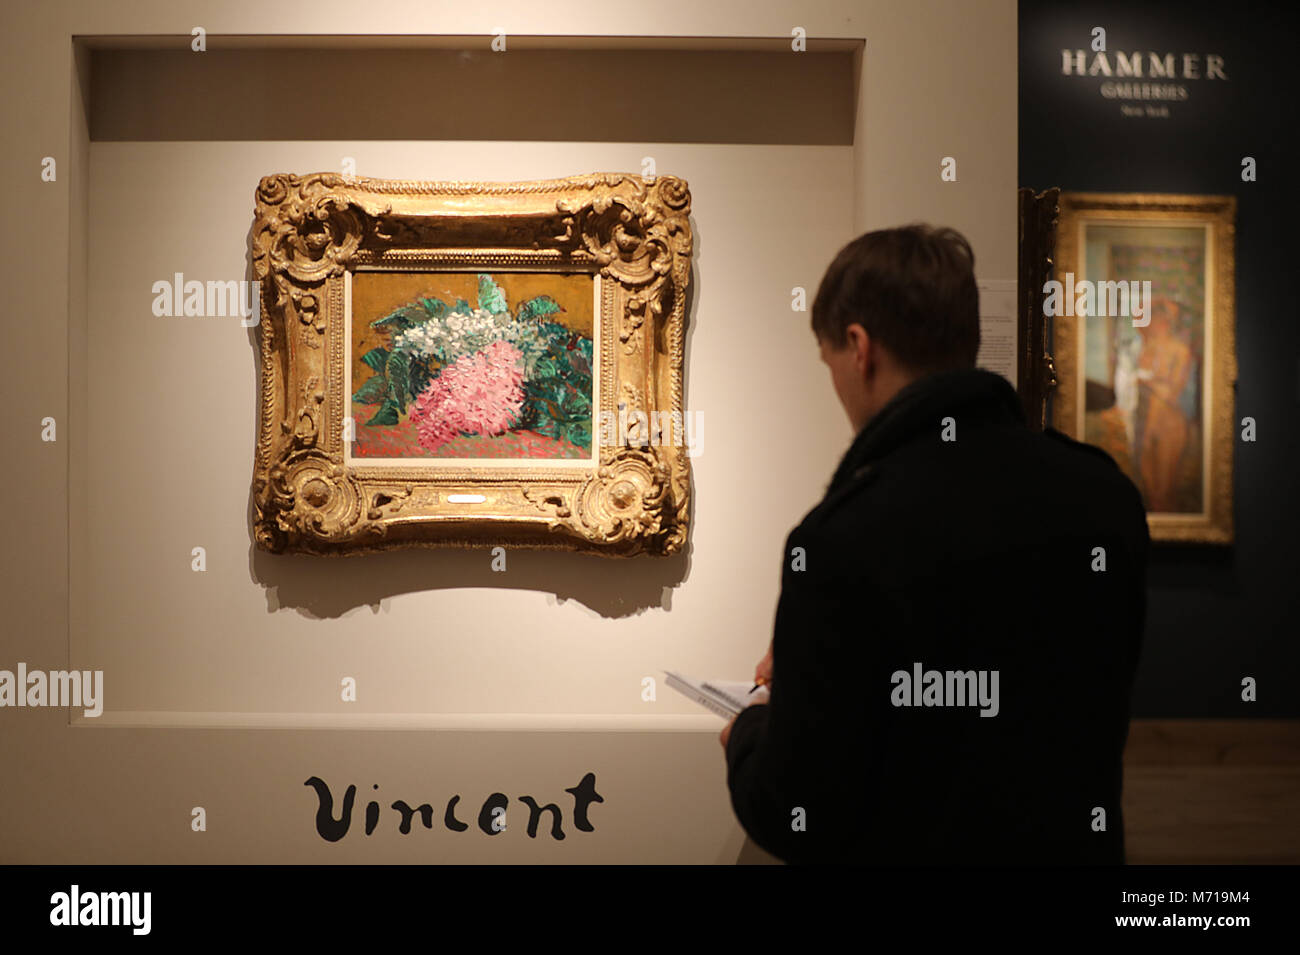 07 March 2018, Netherlands, Maastricht: A visitor stands in front of the painting 'Lilacs' by Vincent van Gogh at the stand of the gallery Hammer at the International Arts and Antiquities Fair TEFAF. The fair takes place from 09 to 18 March 2018. Photo: Oliver Berg/dpa - ACHTUNG: Nur zur redaktionellen Verwendung im Zusammenhang mit einer Berichterstattung über die Kunstmesse TEFAF Stock Photo